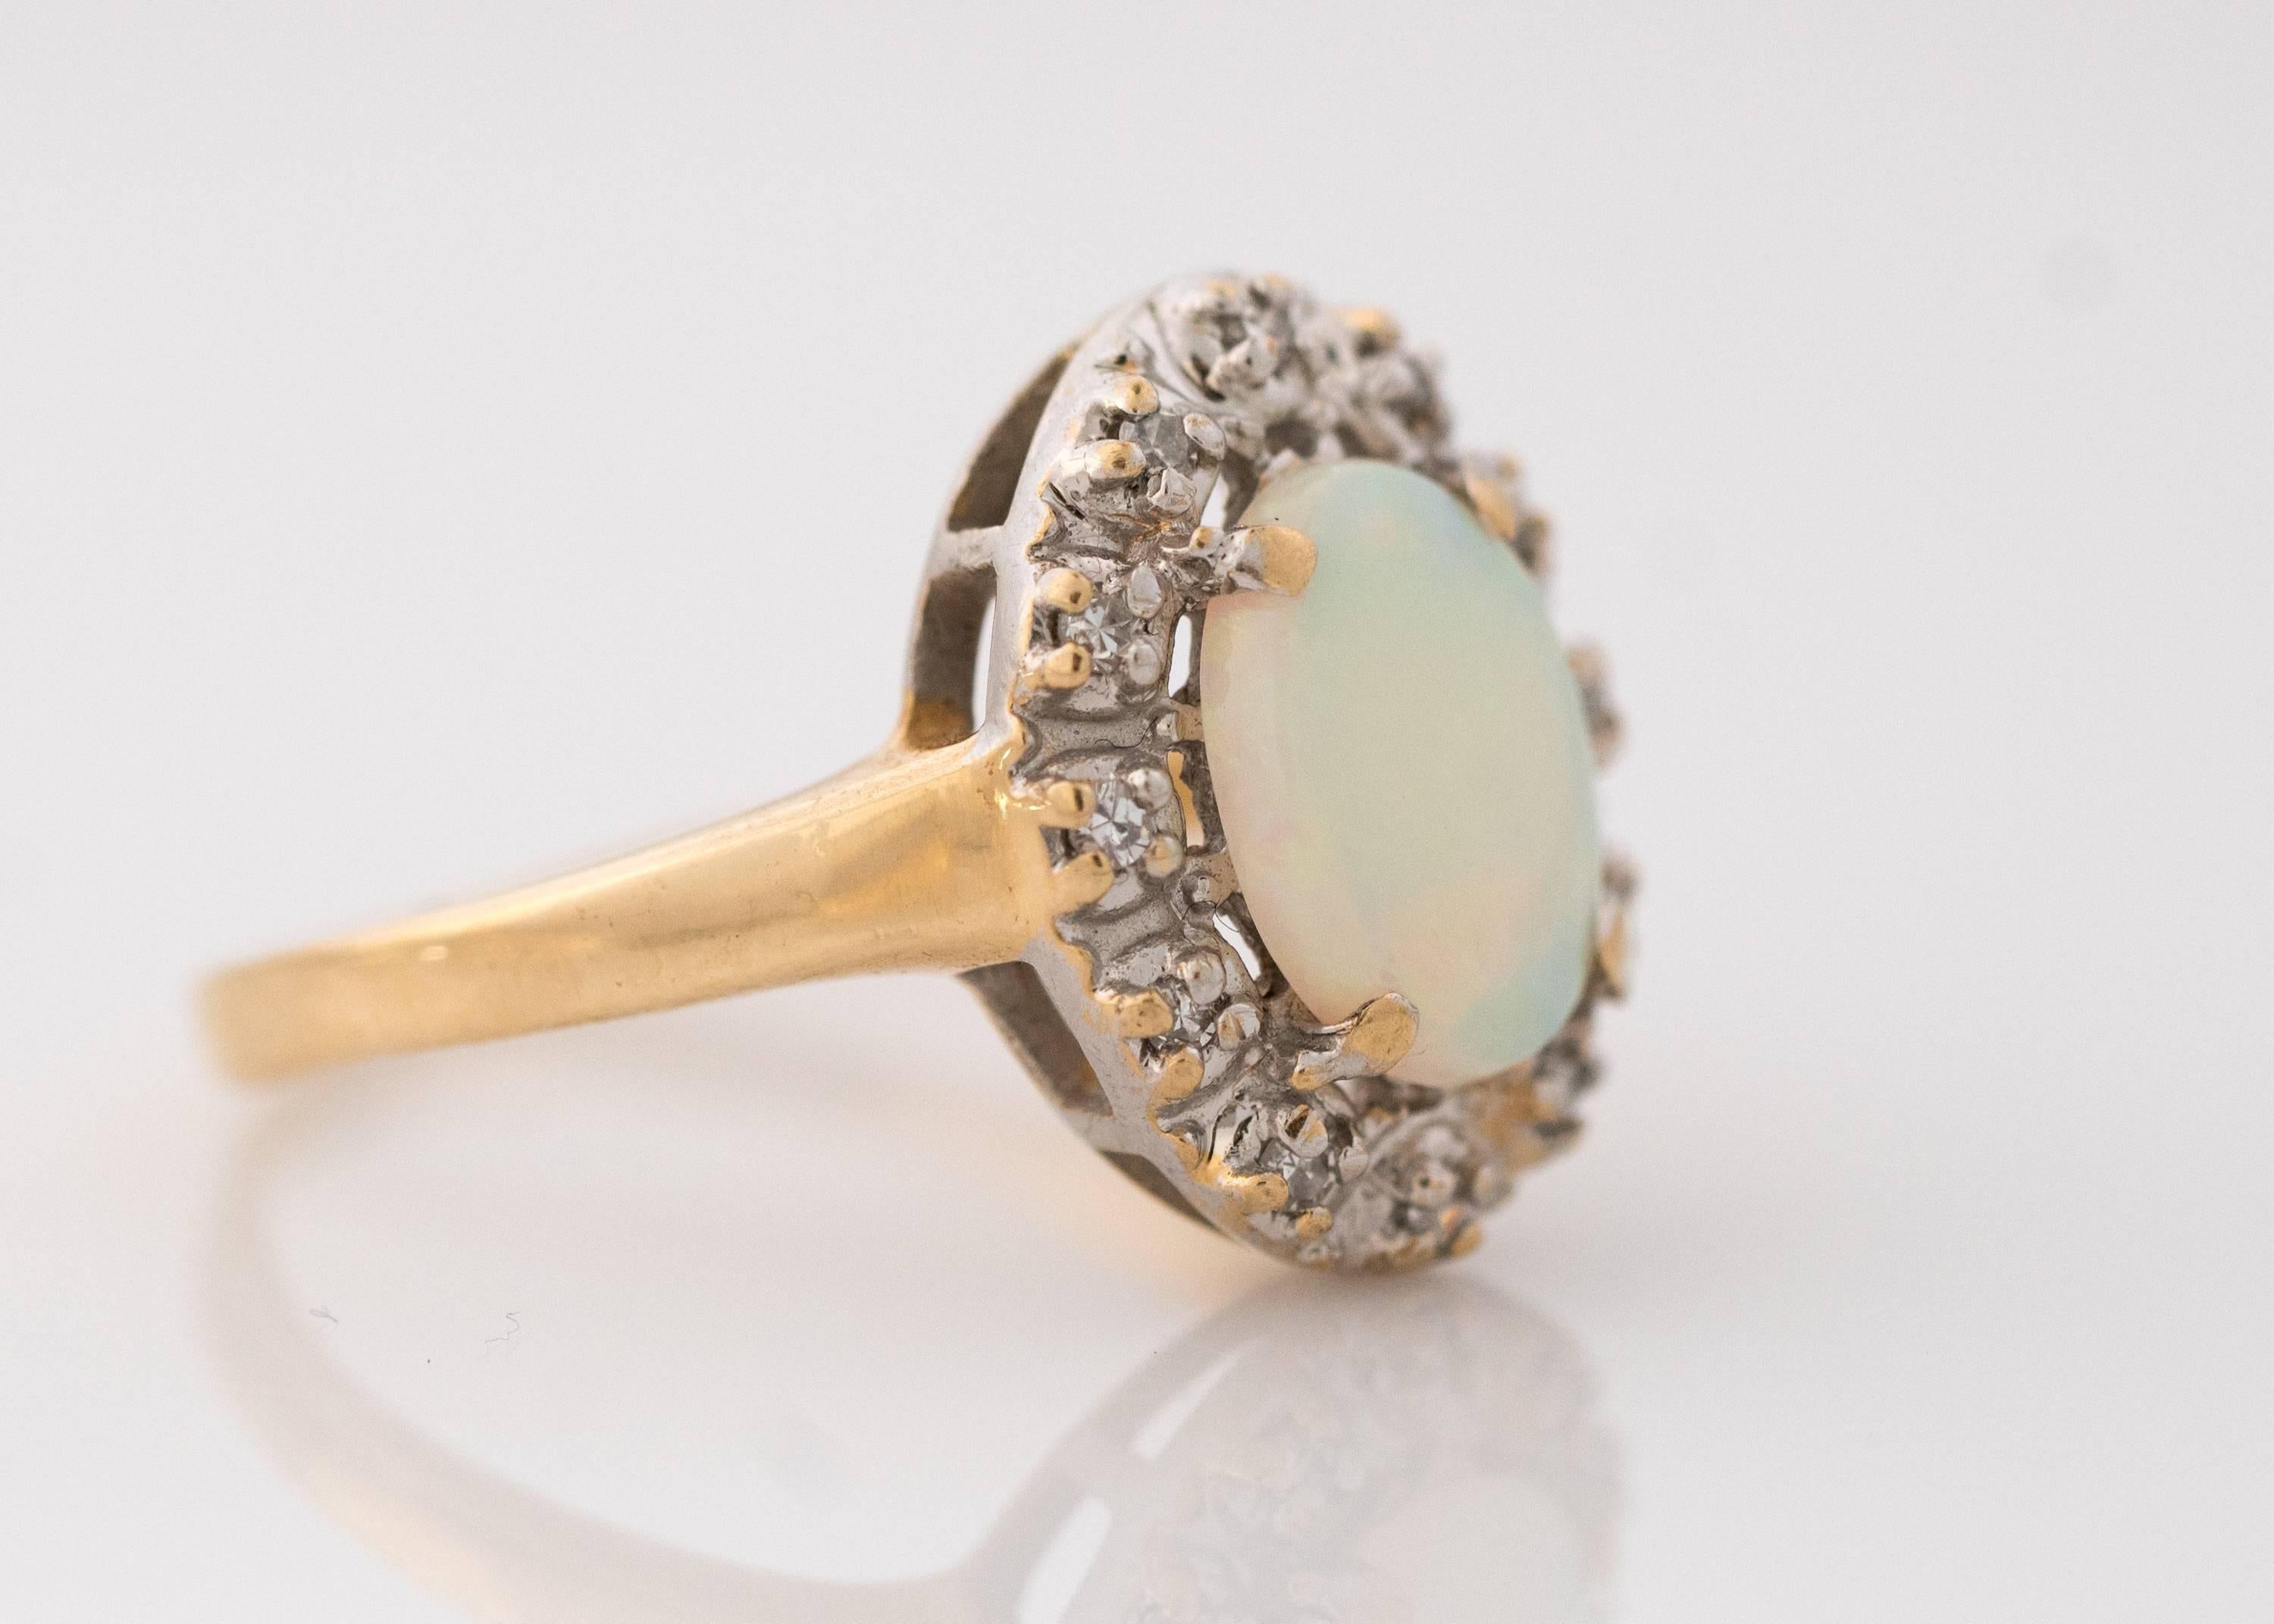 1960s Retro Opal with Diamond Halo, 14 Karat Yellow Gold Ring. Features a Natural Opal Cabochon with green and orange color play. The prong set Oval Opal measures 9 millimeters long by 7.1 millimeters wide. It is surrounded by a 0.10 carat total